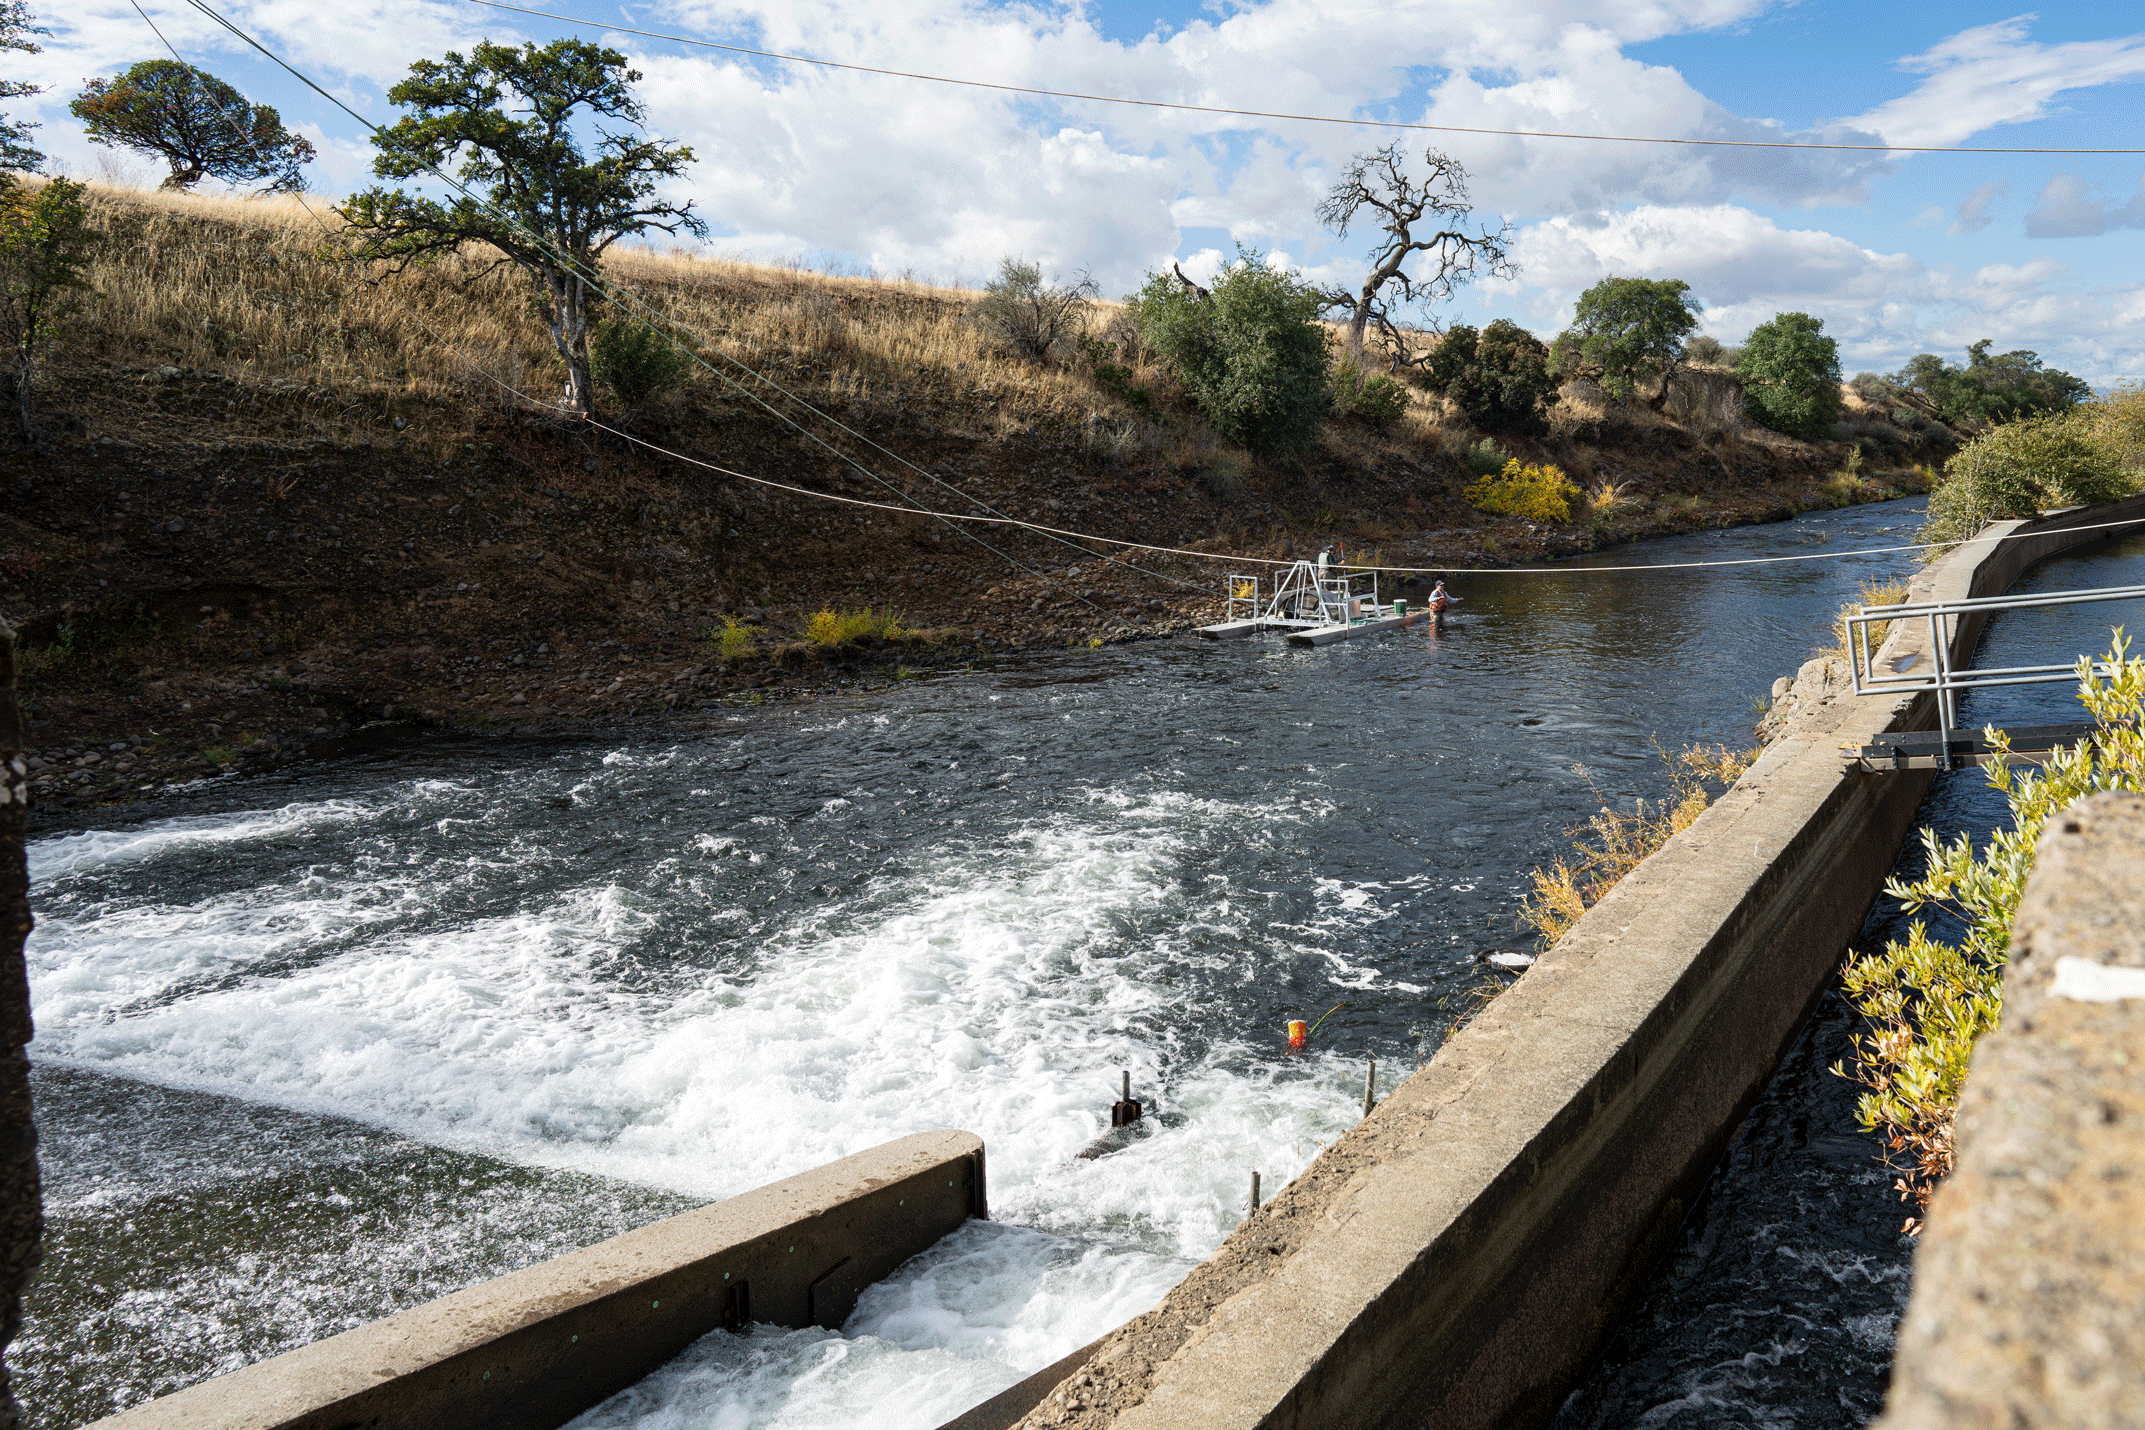 California Department of Fish and Wildlife try to catch salmon in Mill Creek, photo by: Jael Mackendorf, UC Davis